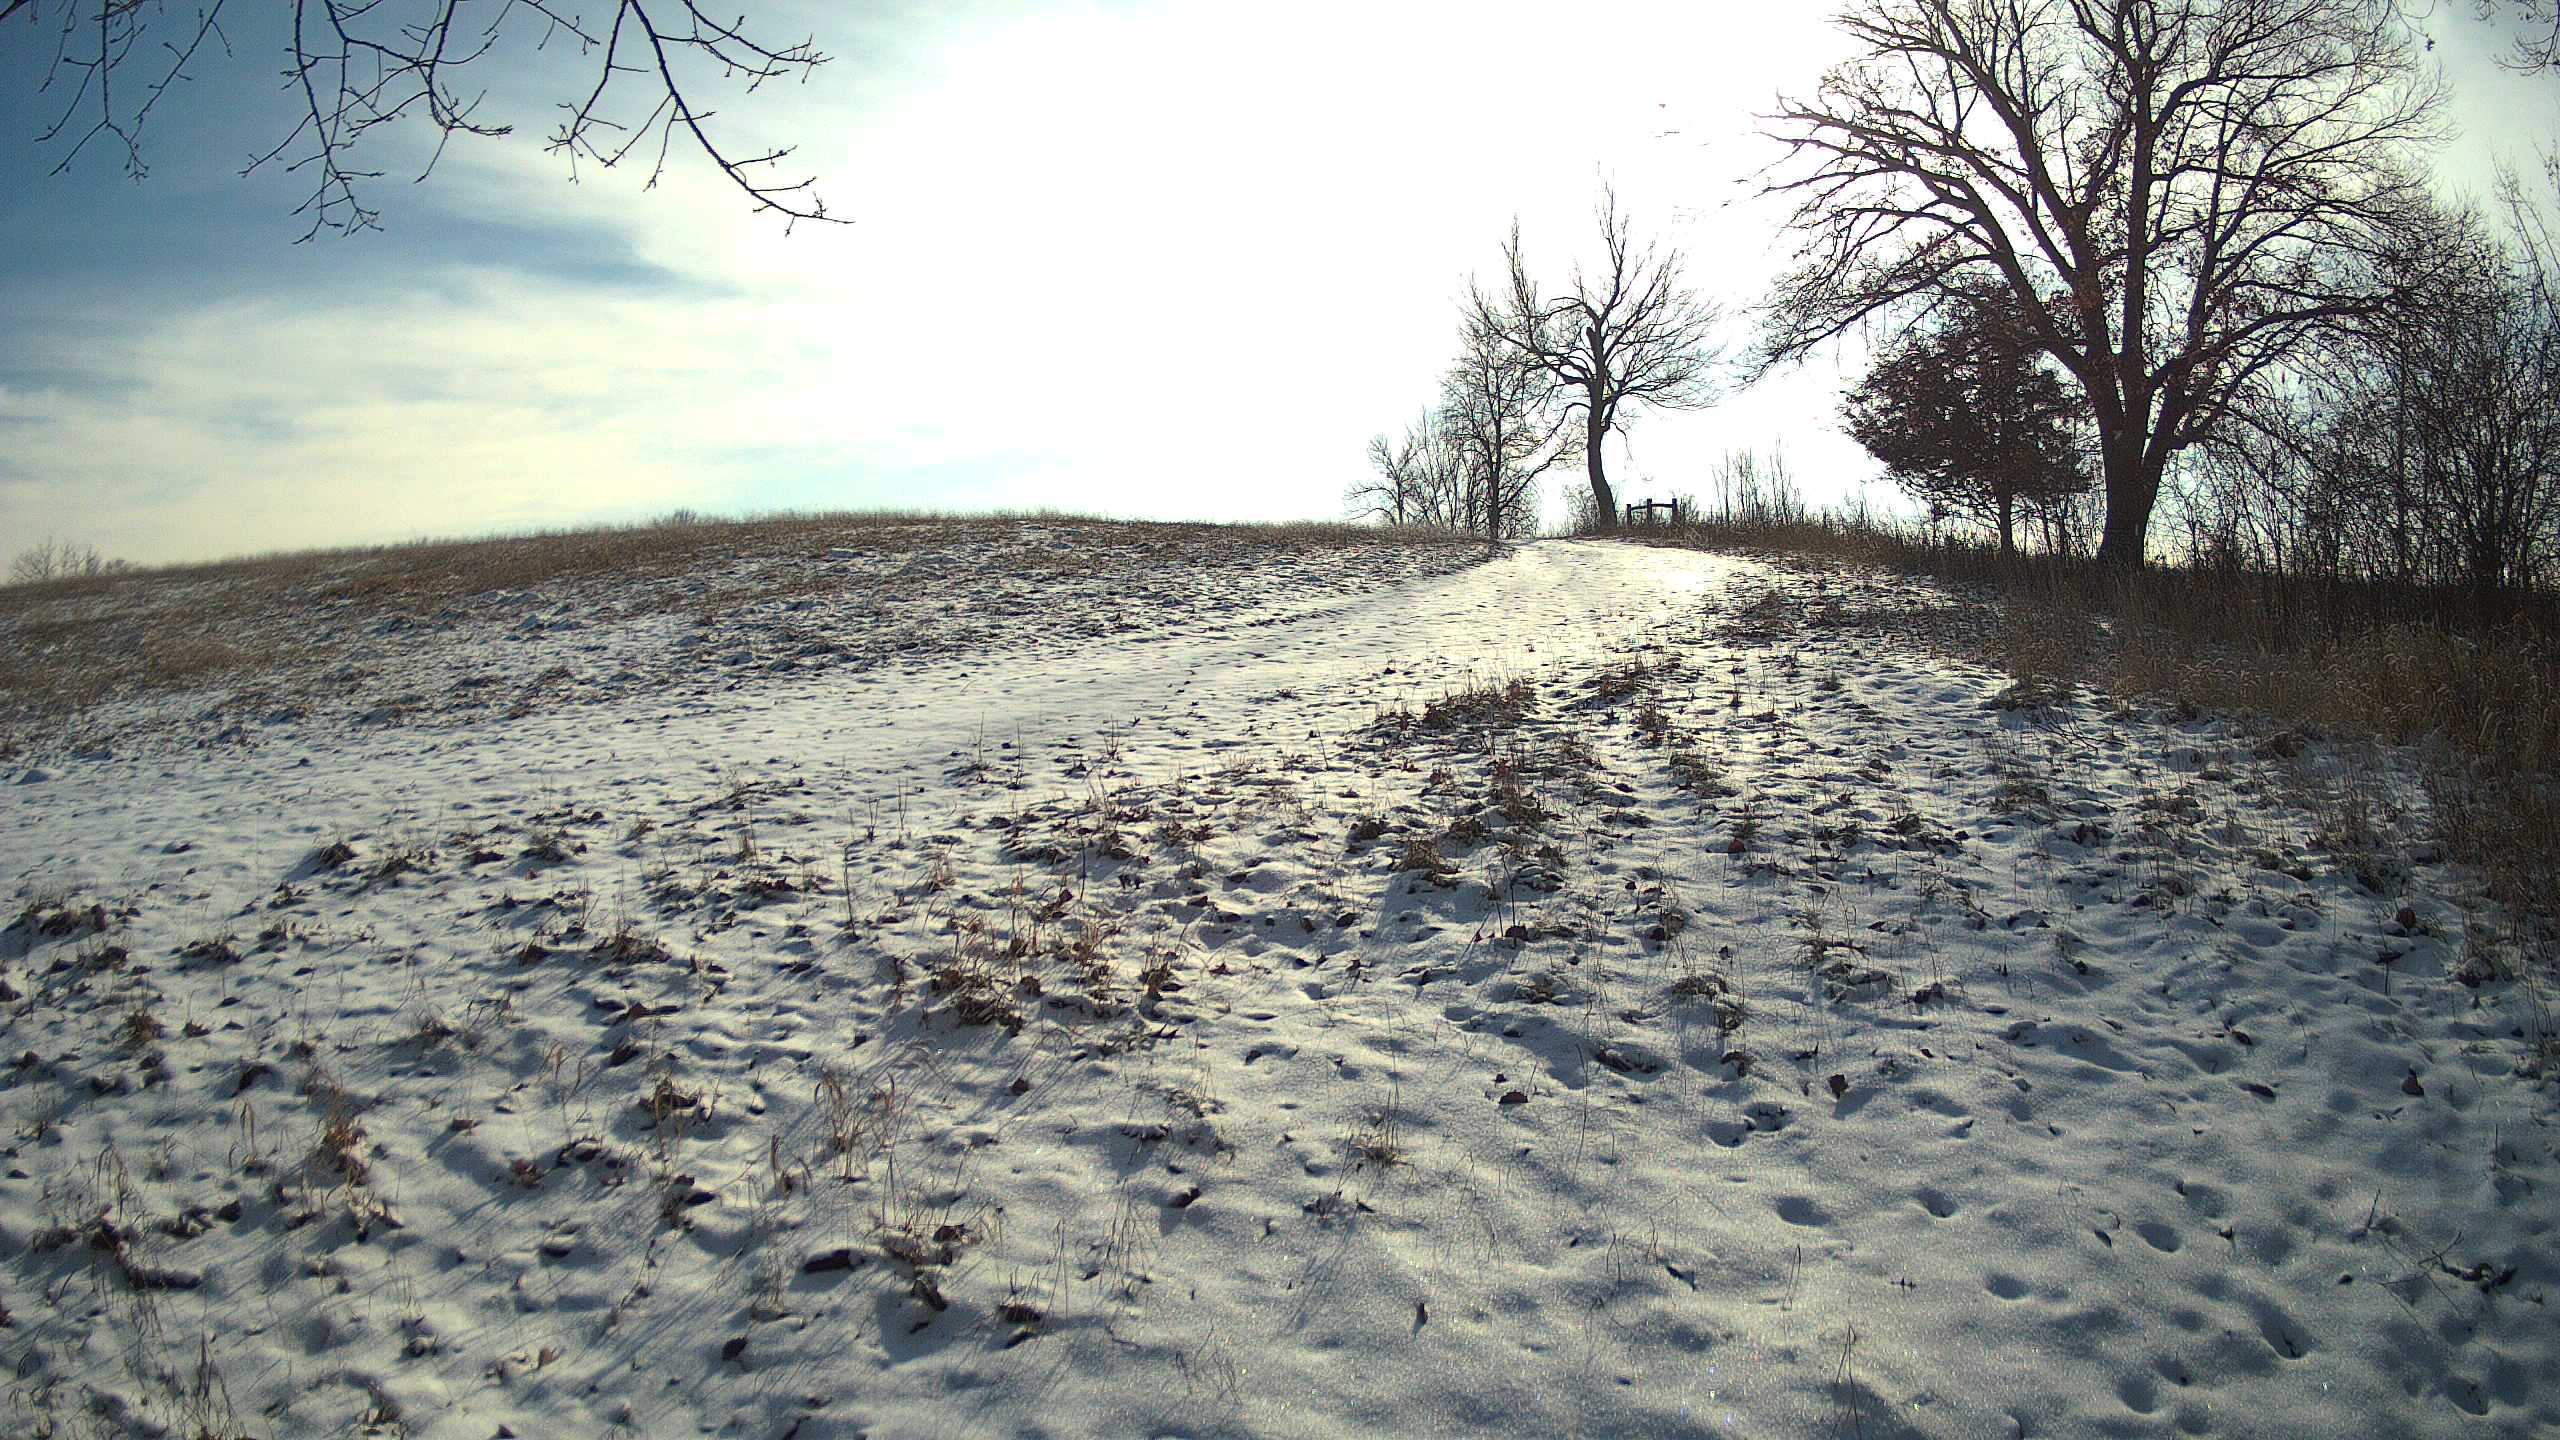 A photo from the field camera